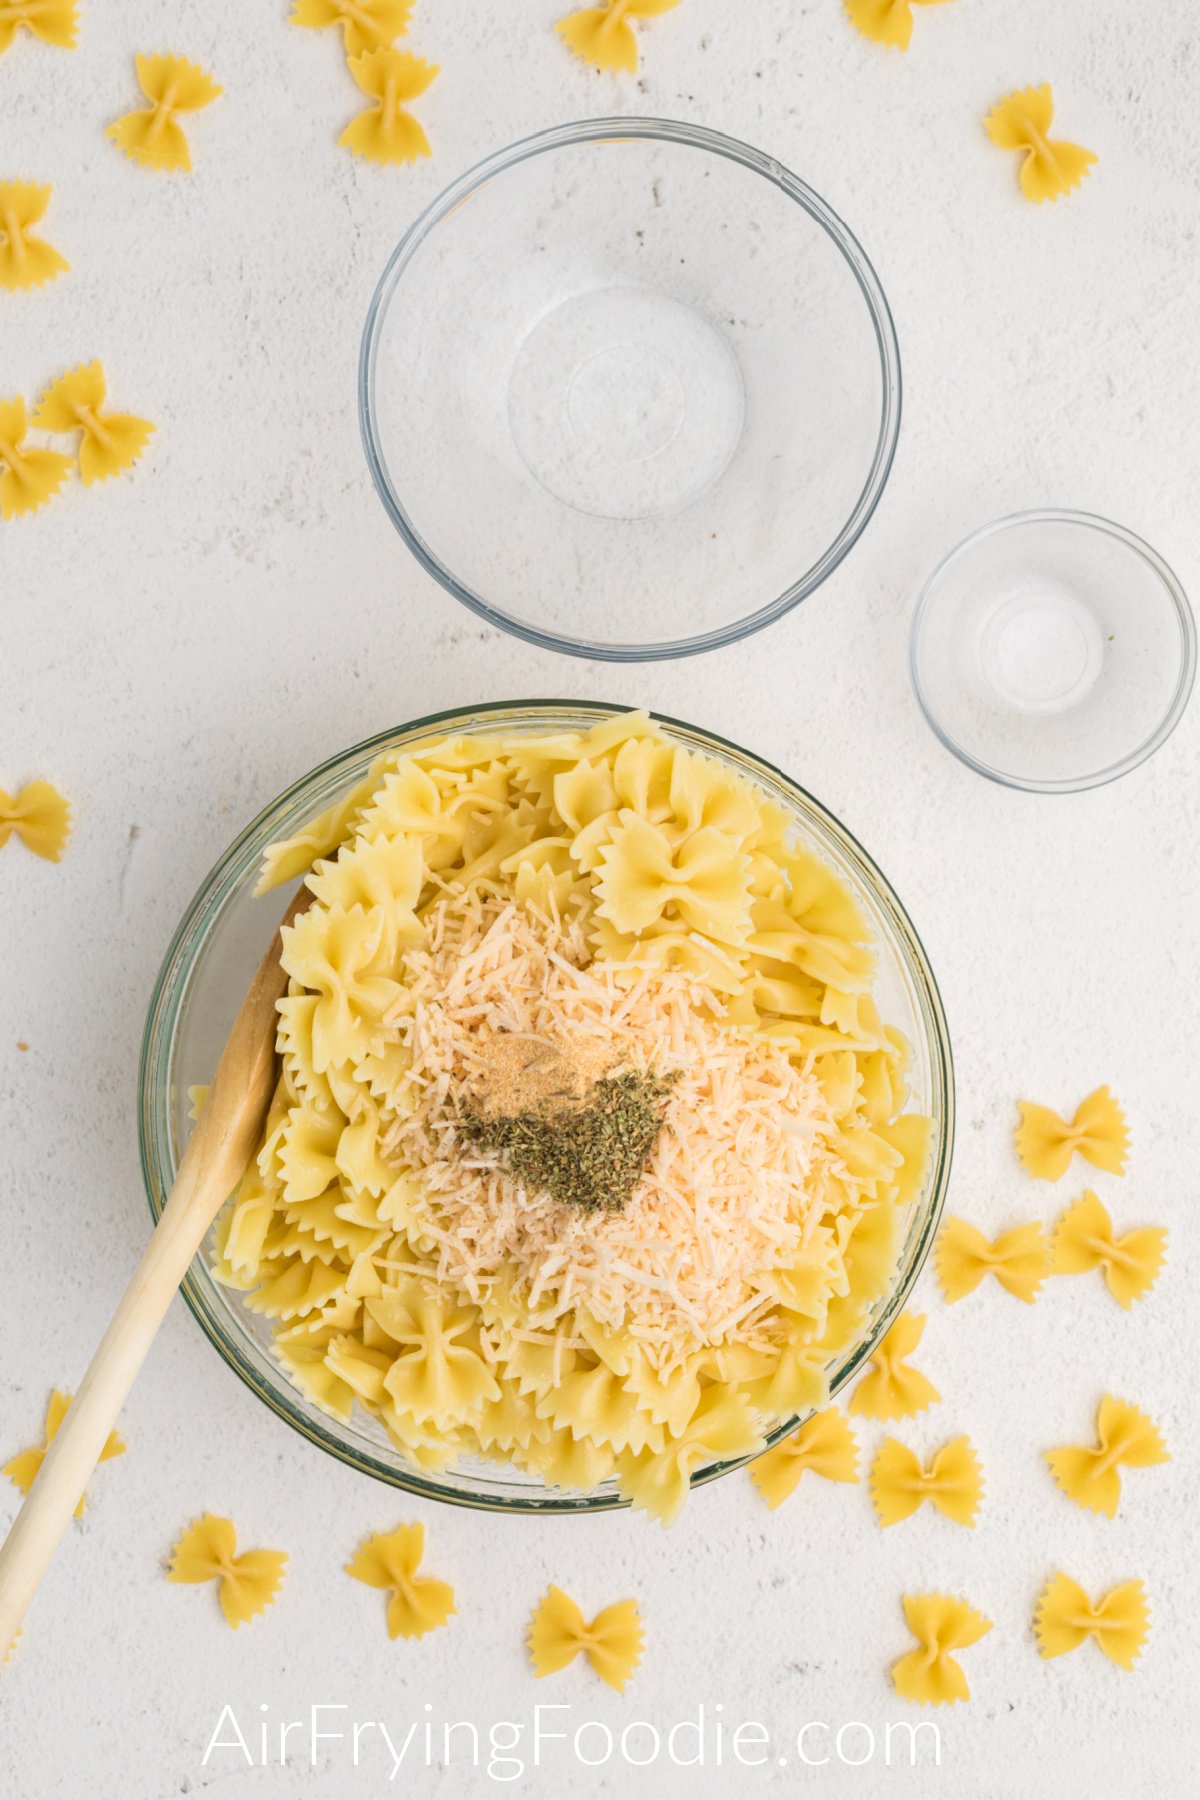 Cooked pasta with cheese and seasonings added.